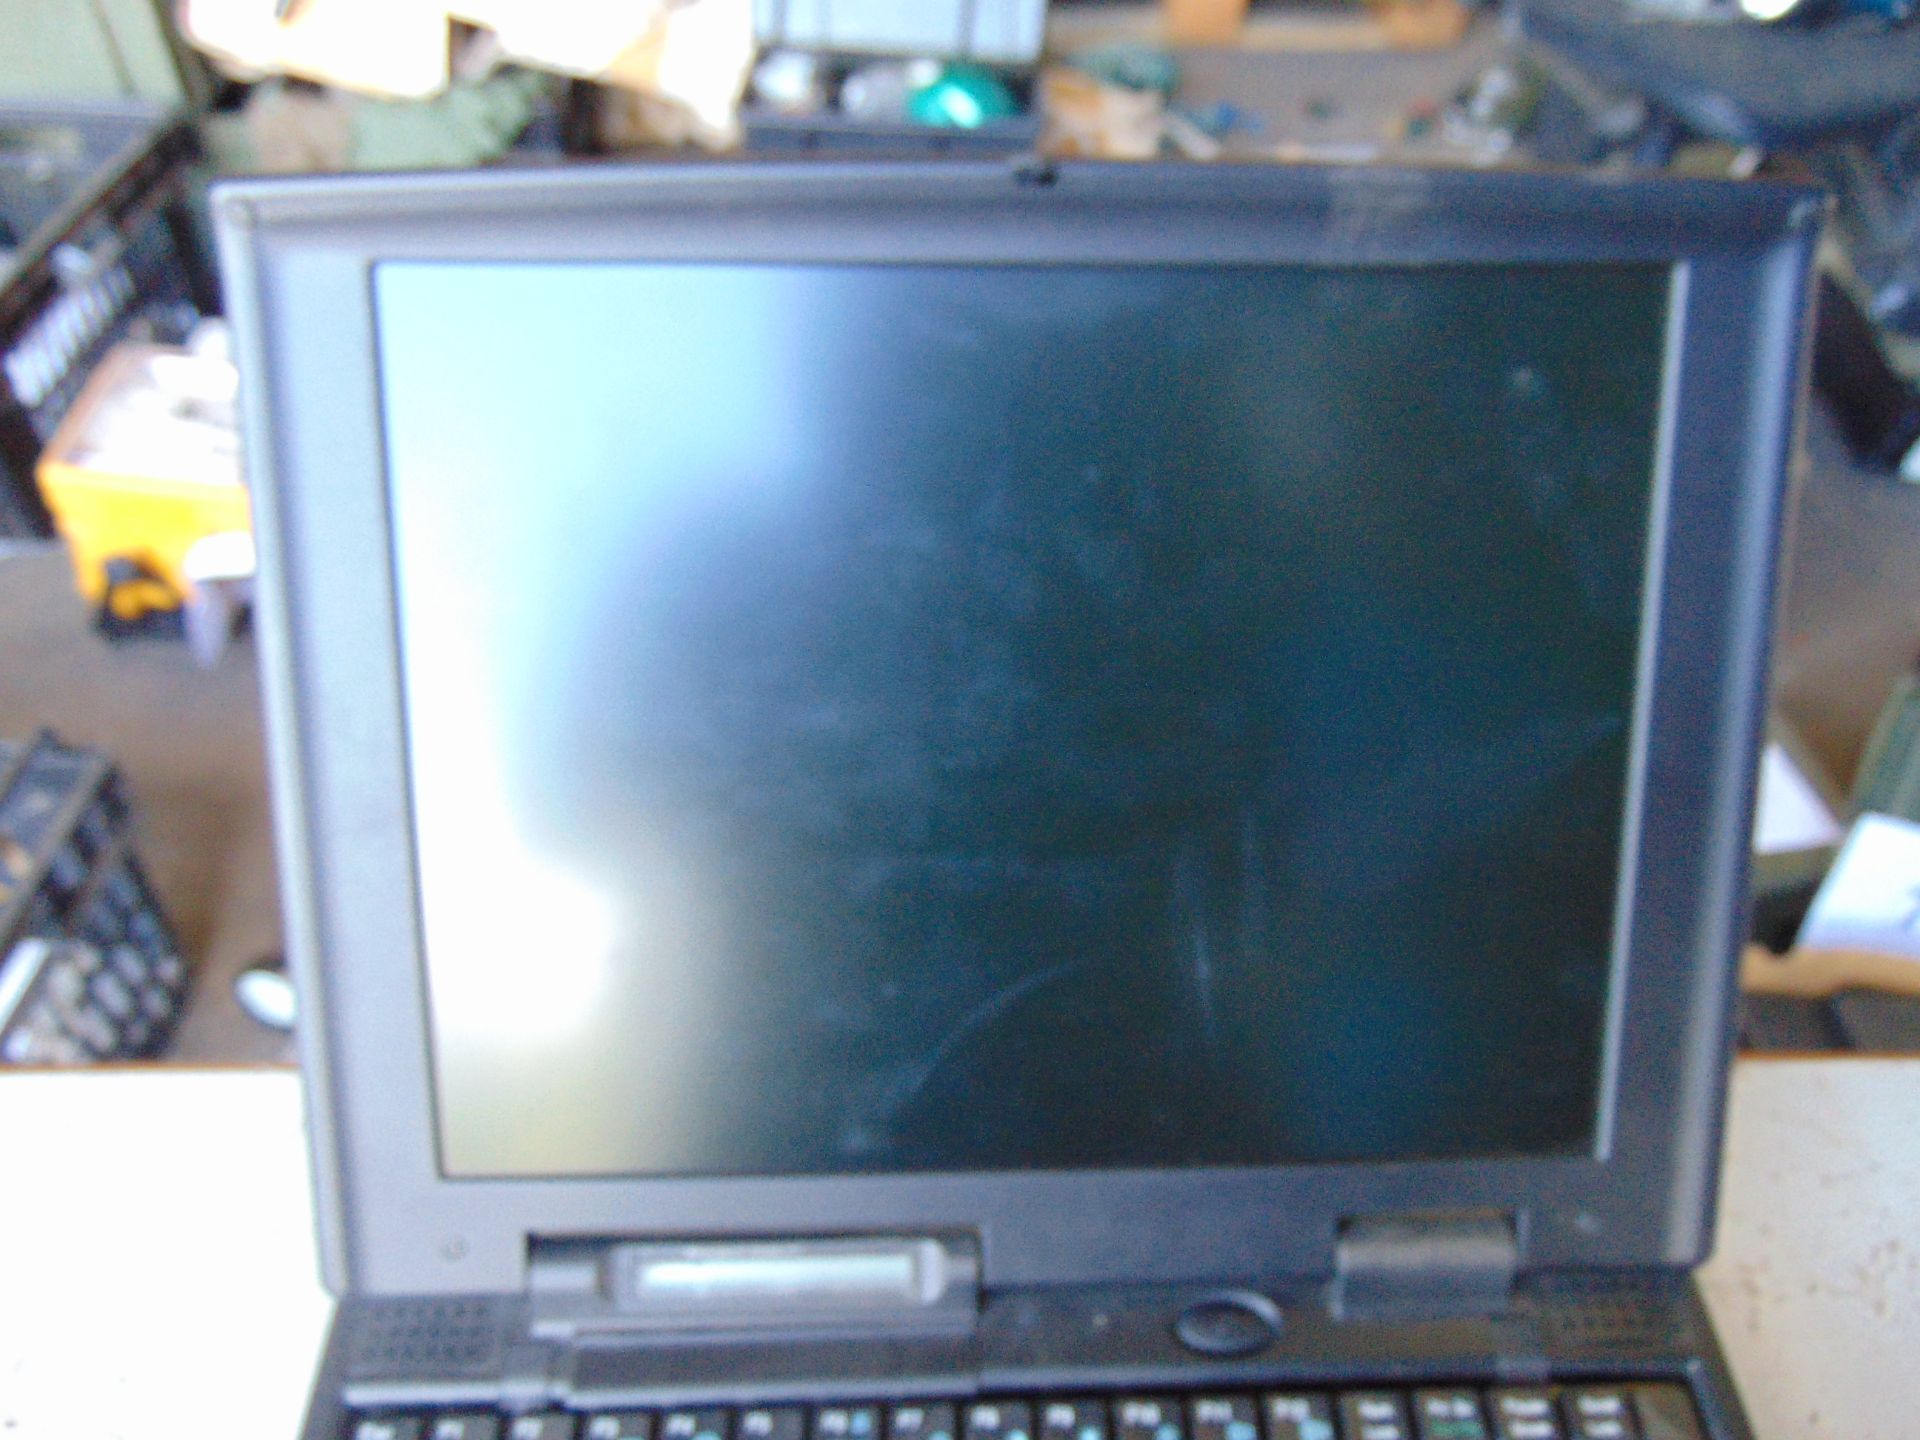 Compaq Notebook PC - Image 3 of 3